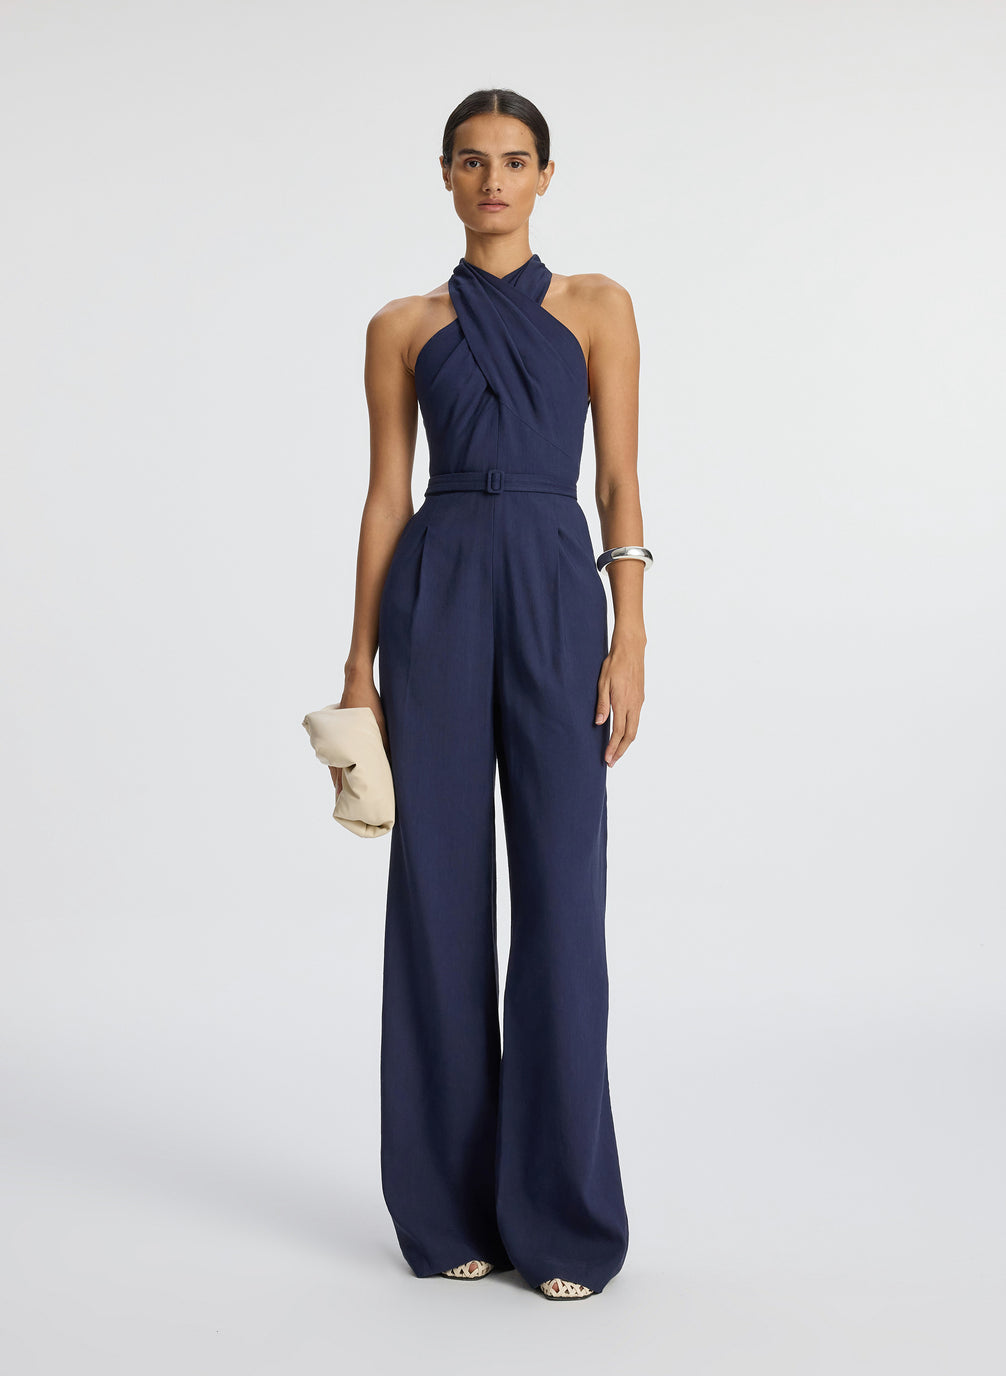 front view of woman wearing navy blue sleeveless jumpsuit